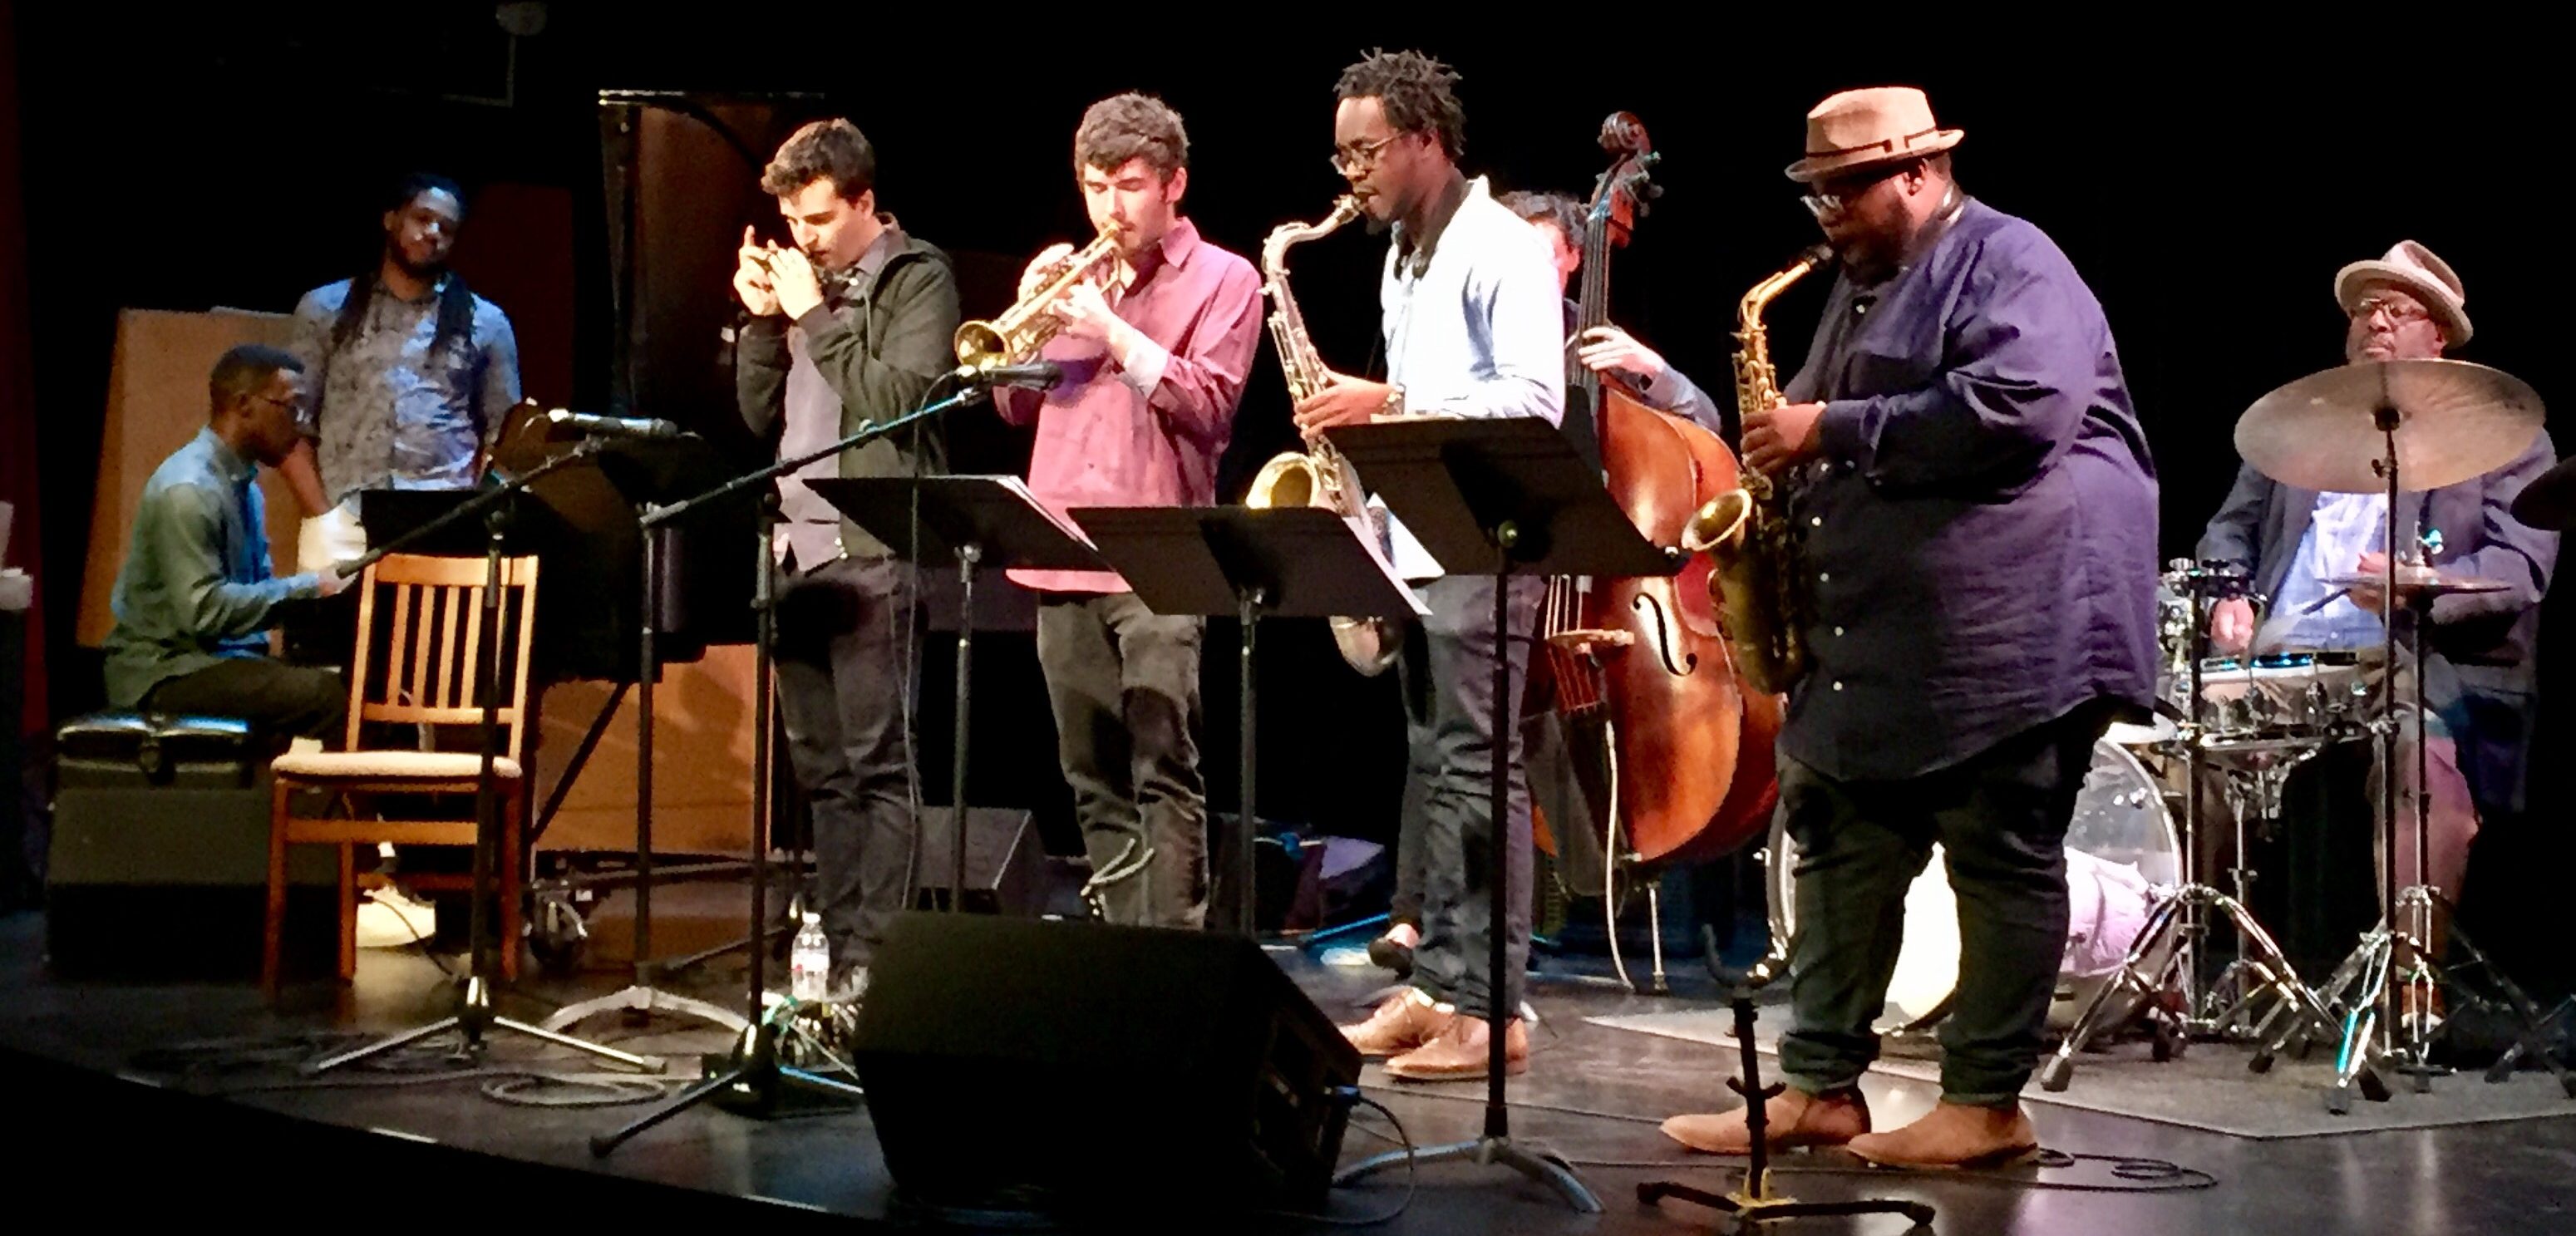 Drummer Carl Allen performs with the Thelonious Monk Institute of Jazz Performance Ensemble. Musicians onstage include a pianist, a harmonicist, a trumpeter, a tenor saxophonist, a bassist and an alto saxophonist.